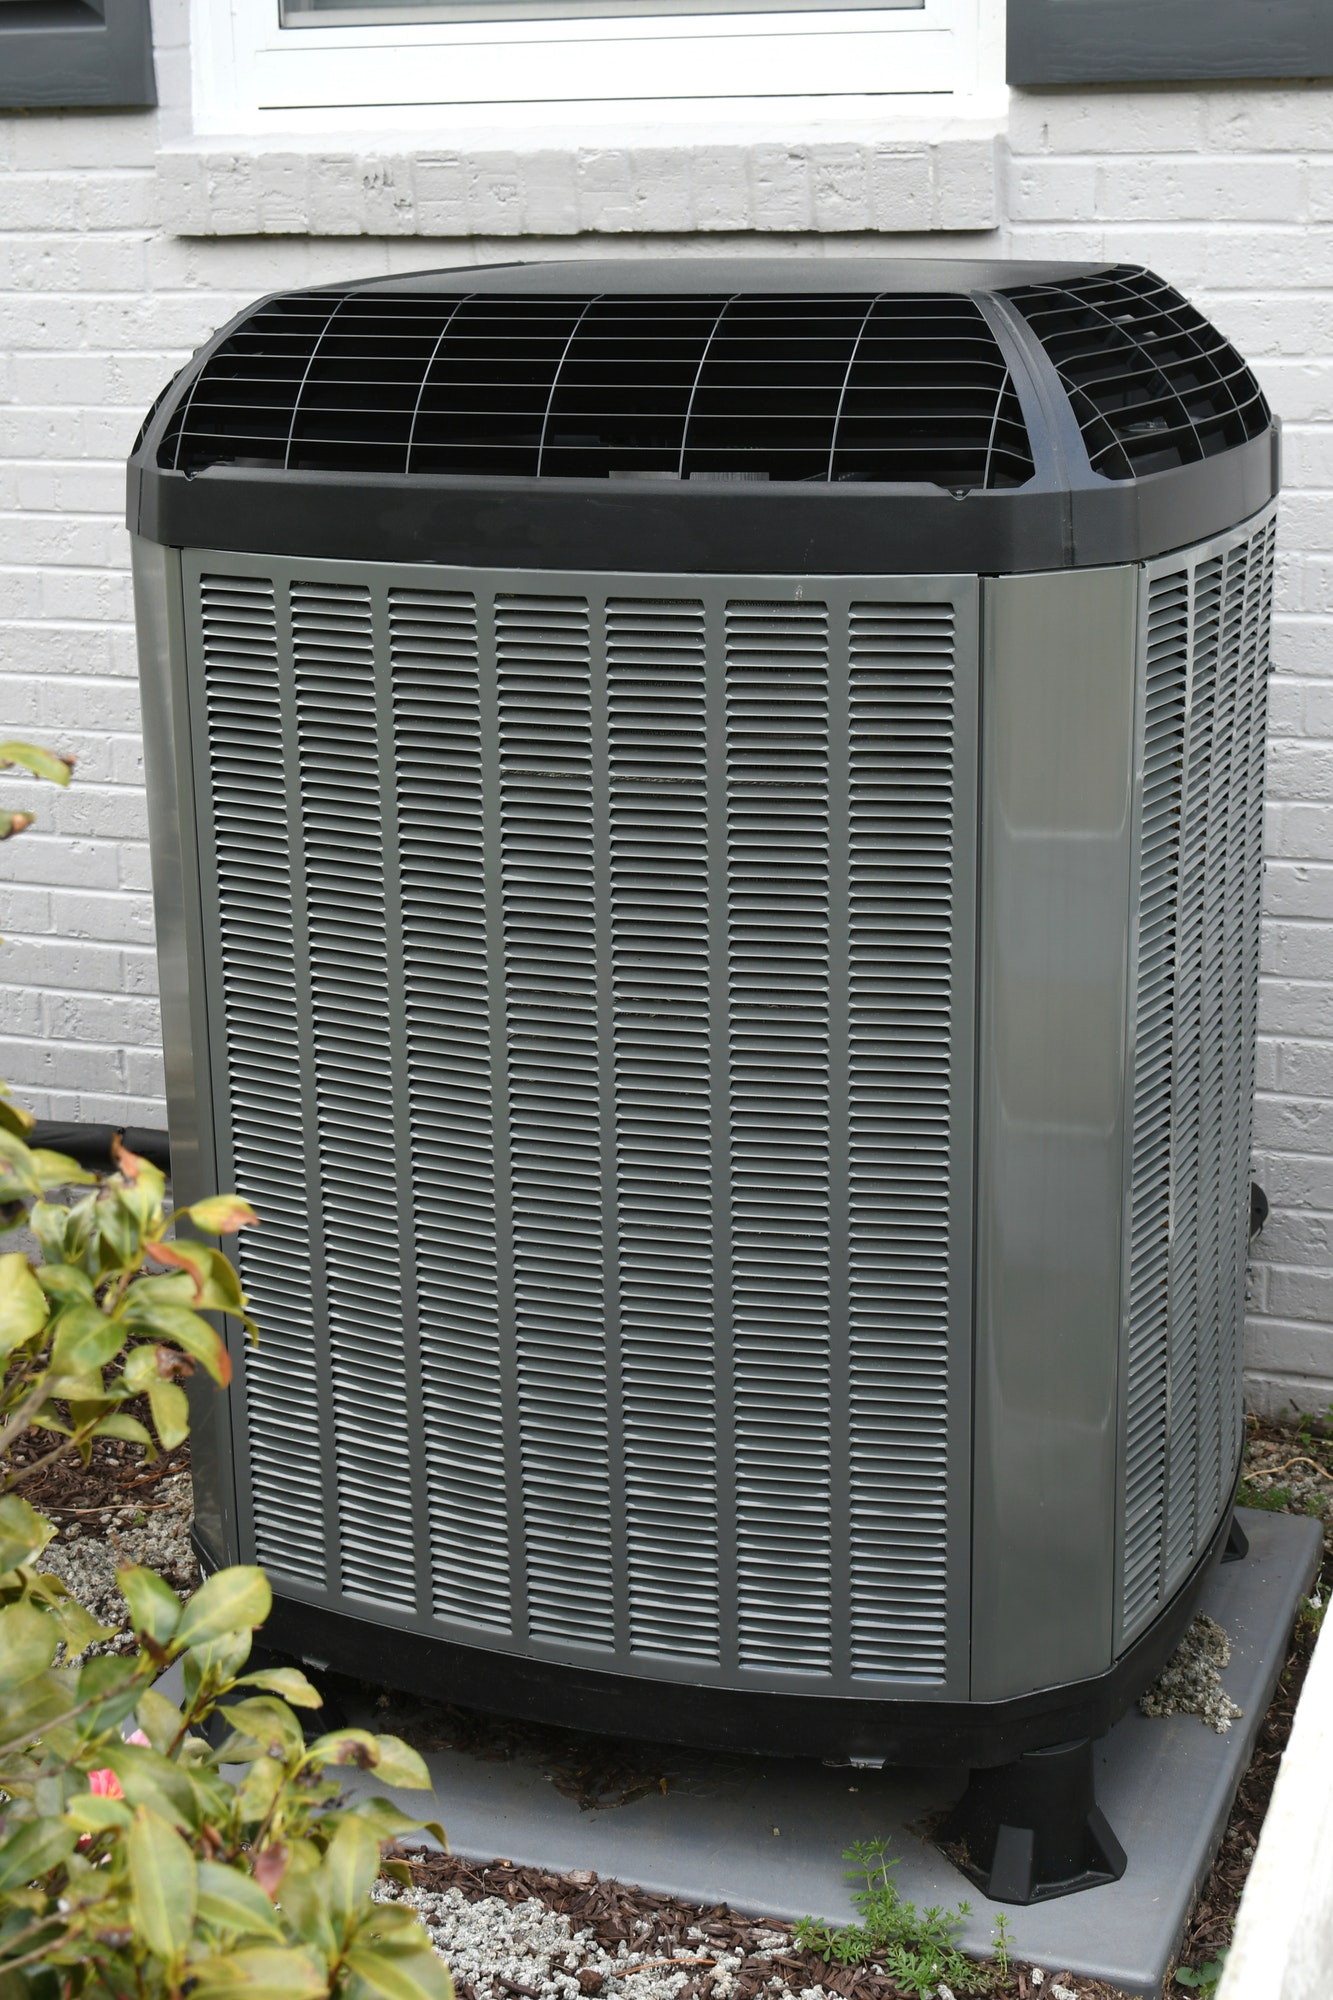 High efficiency quiet outdoor HVAC heating and cooling unit. generic, logos removed